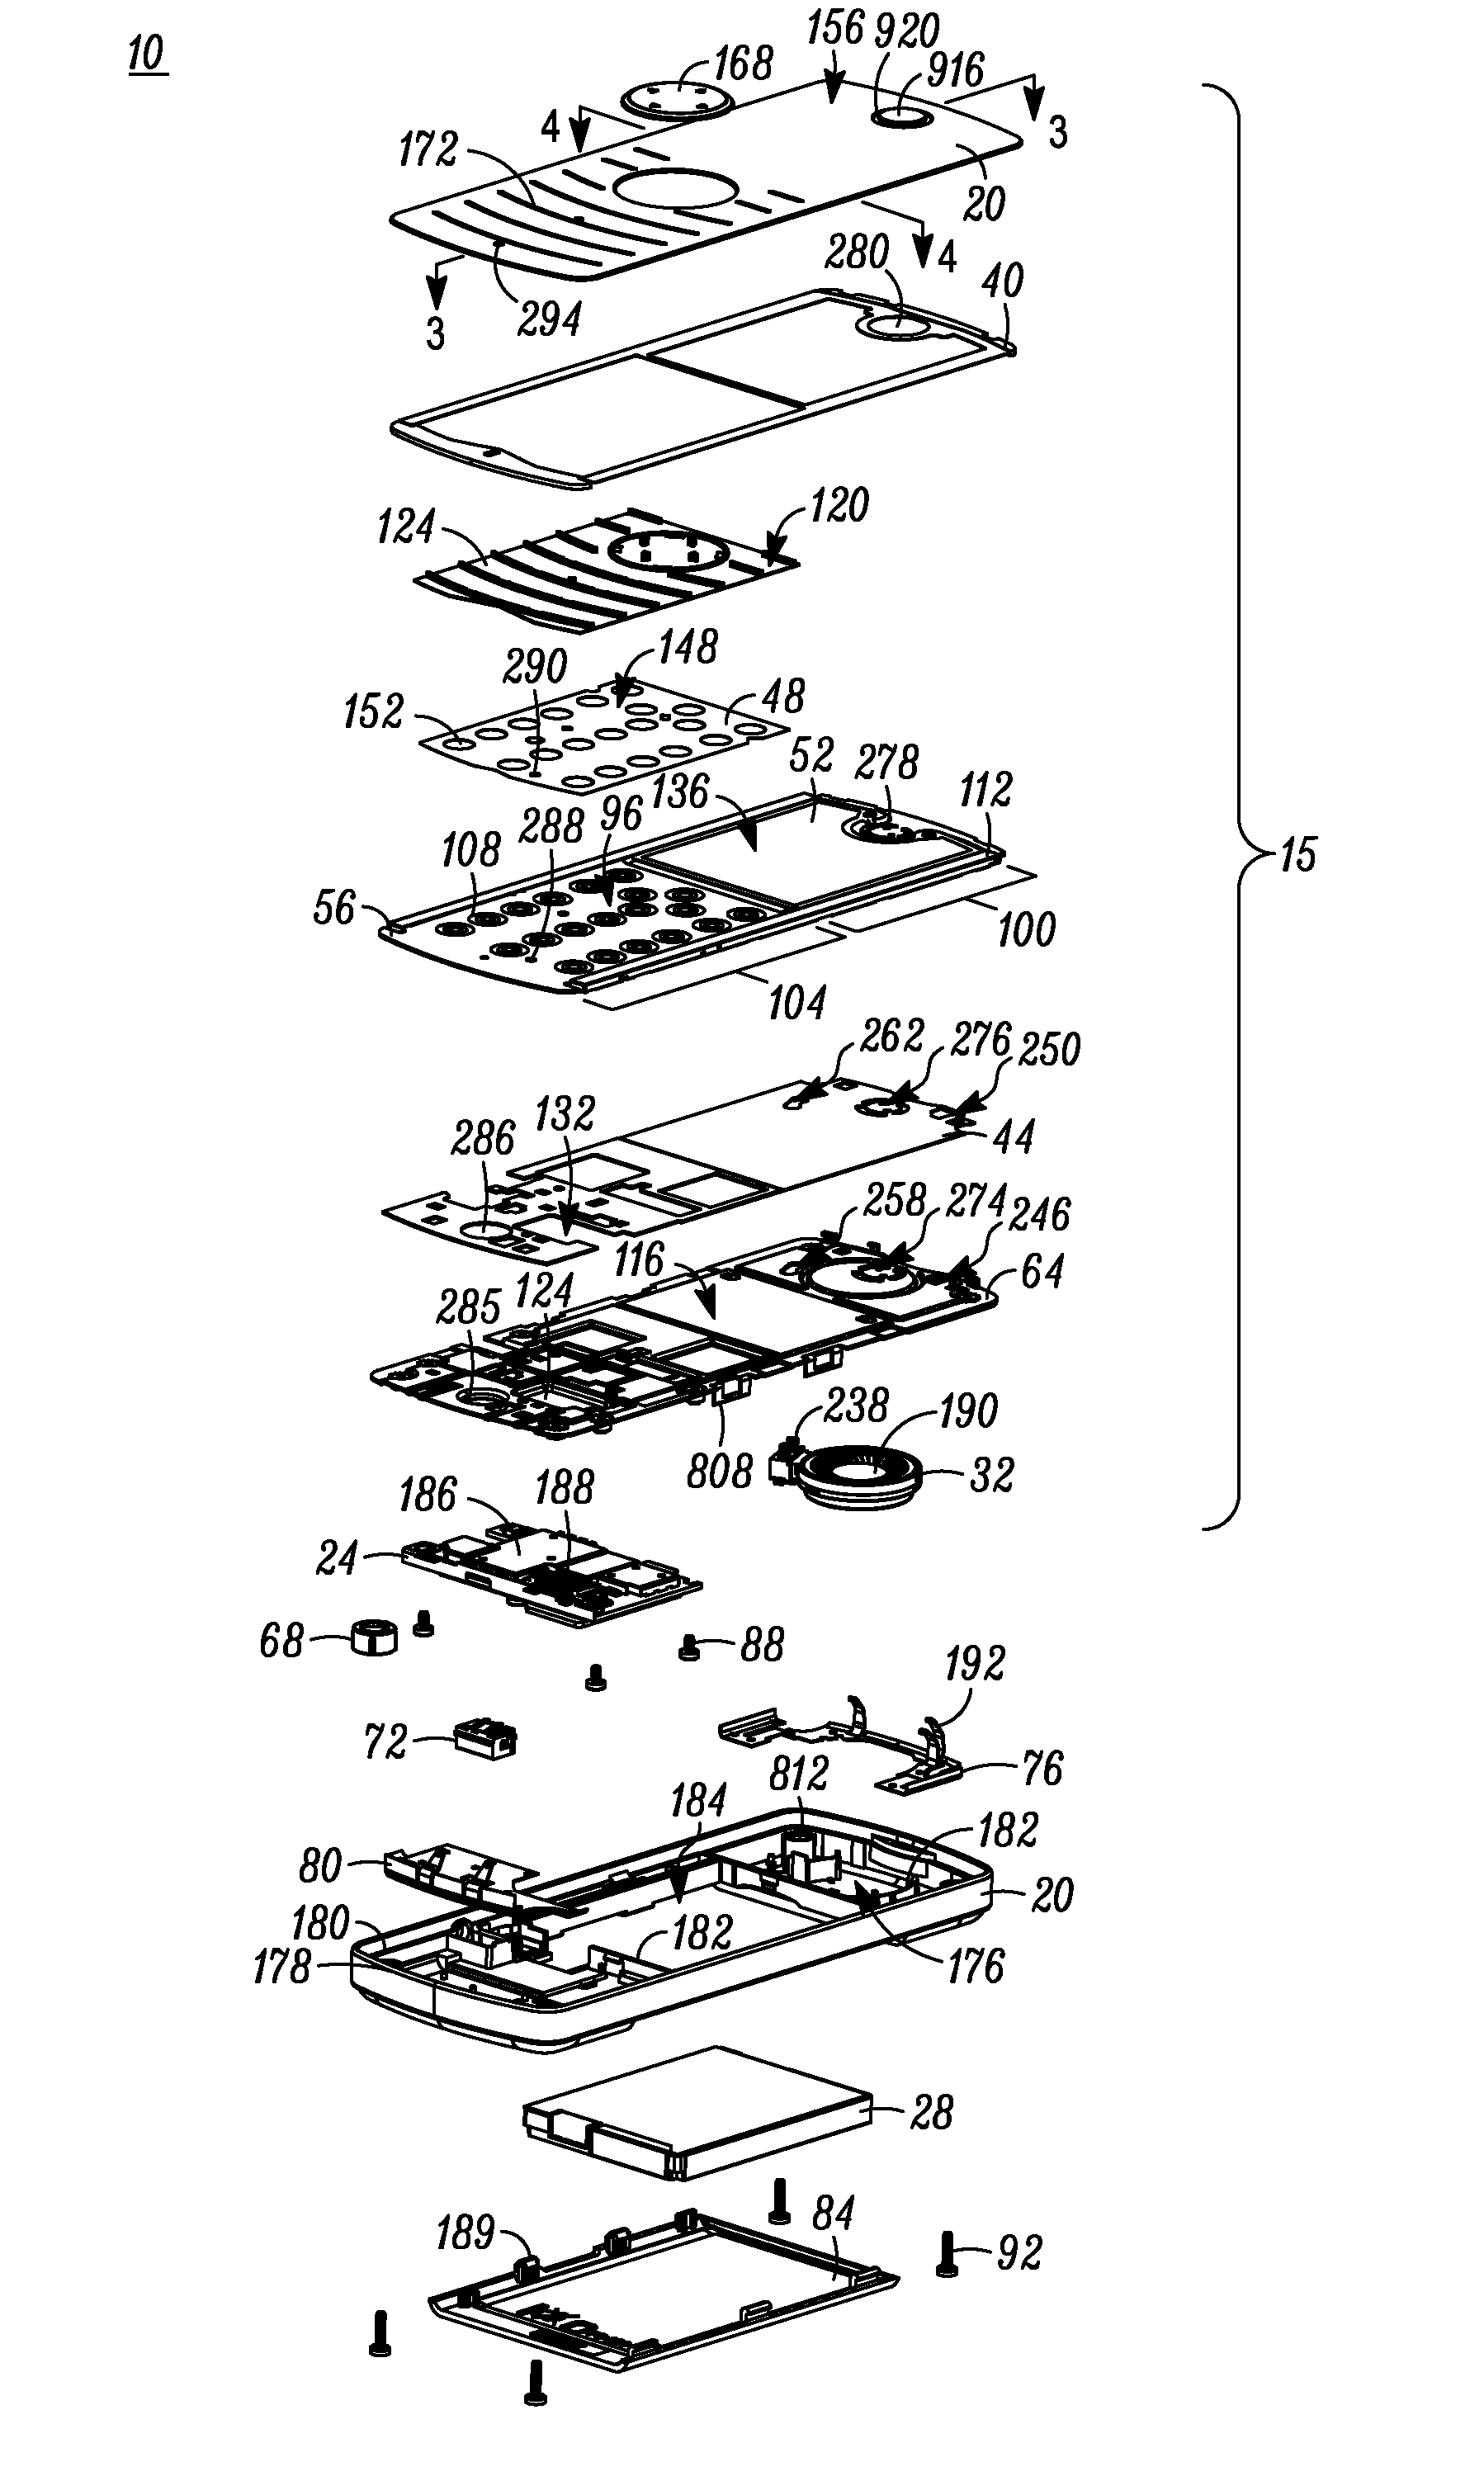 Handset device with audio porting